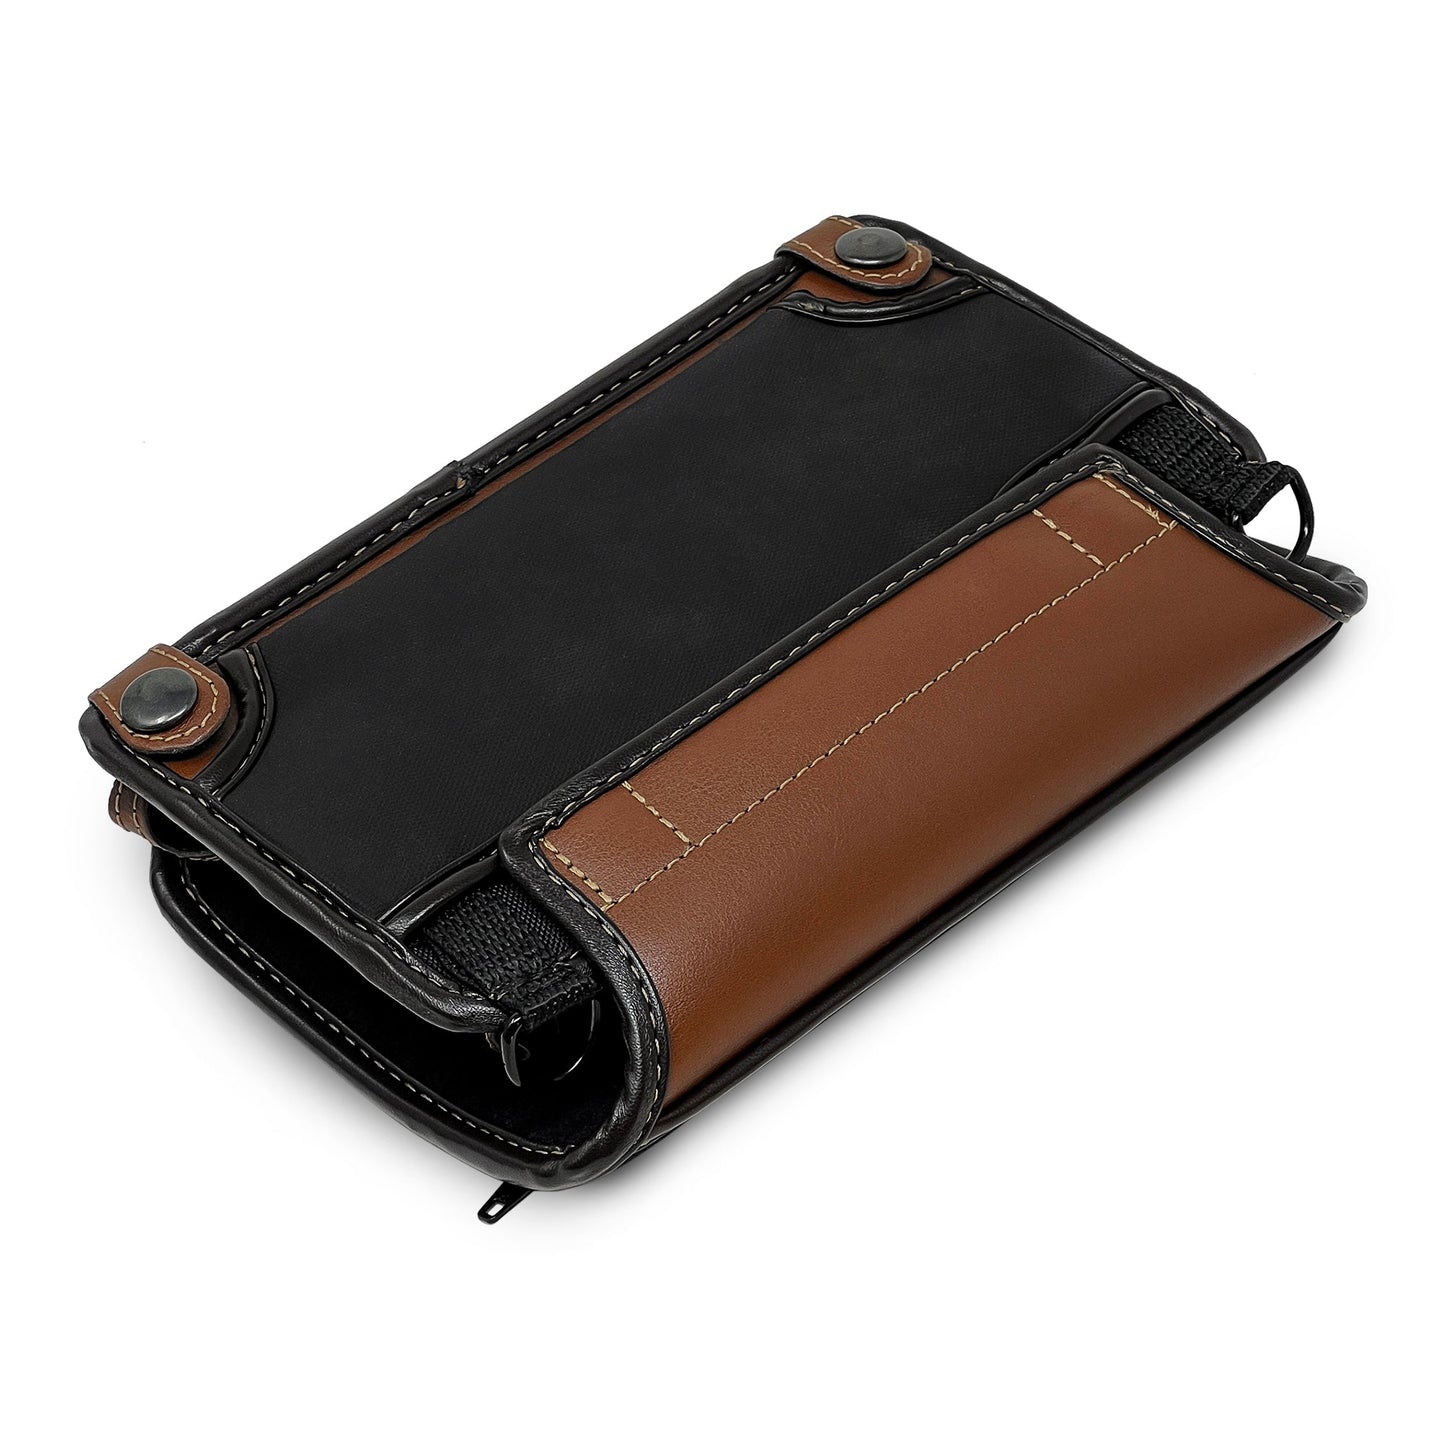 APH Chameleon 20 Fitted leather case with straps by Turtleback